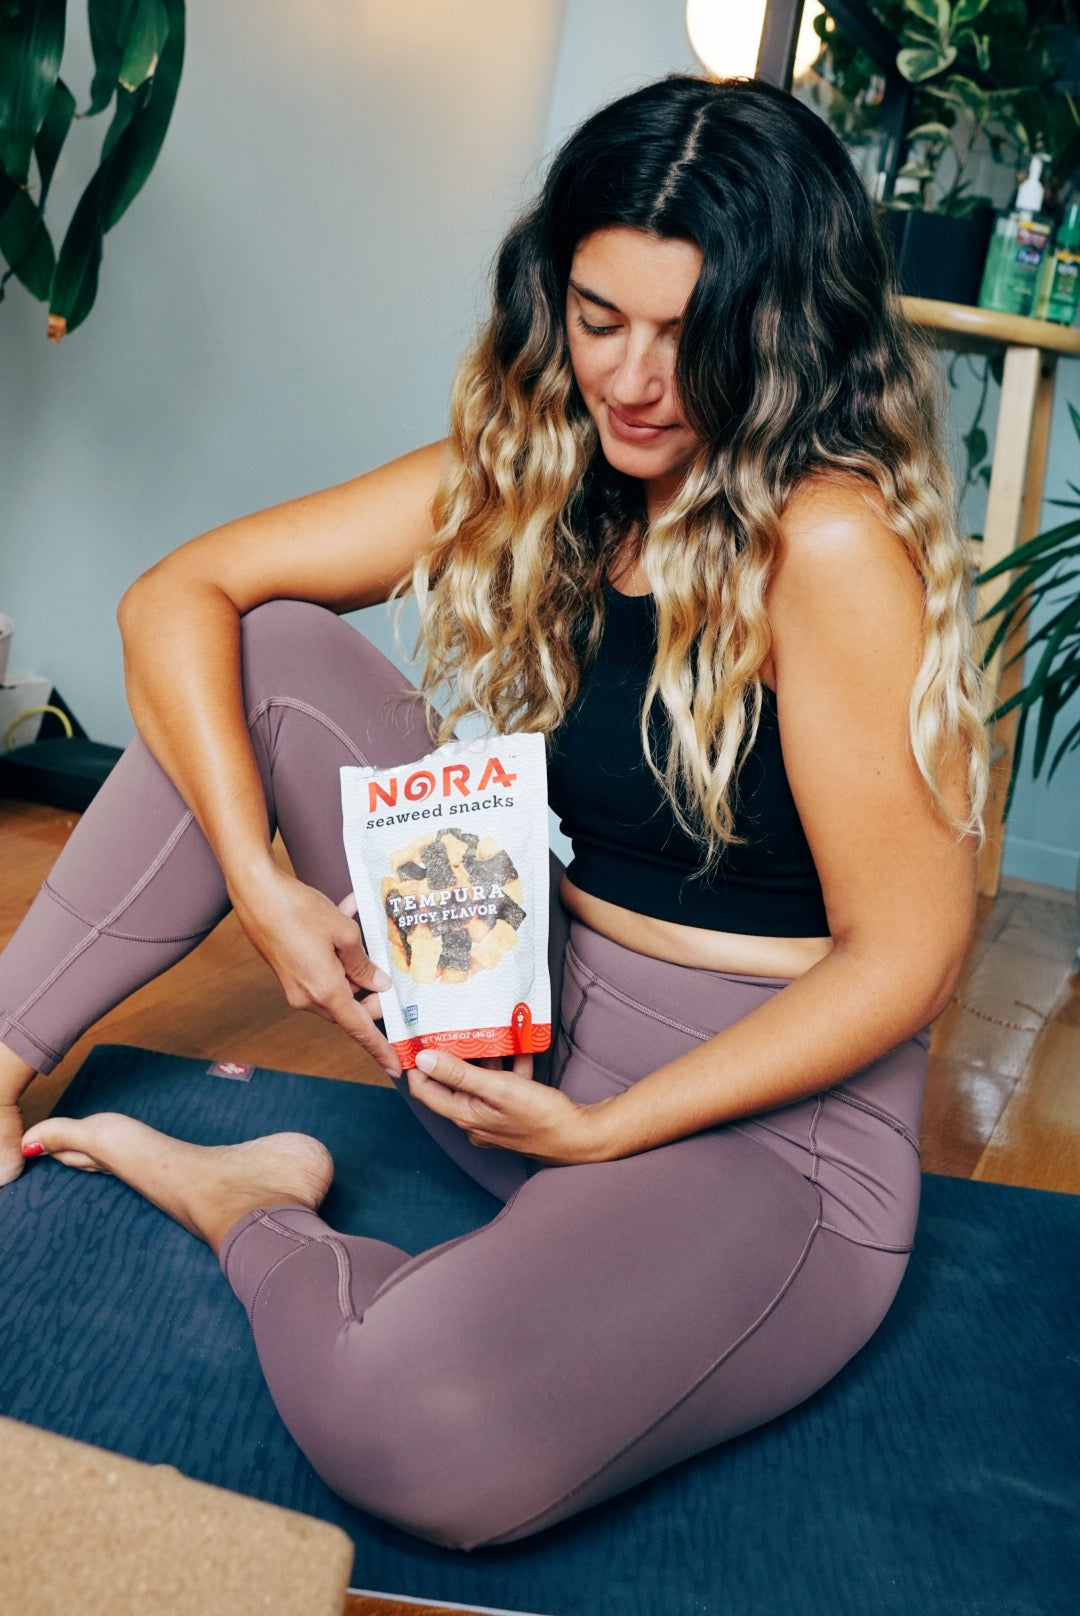 Young woman is holding Nora Seaweed Snacks bag while sitting on a floor.